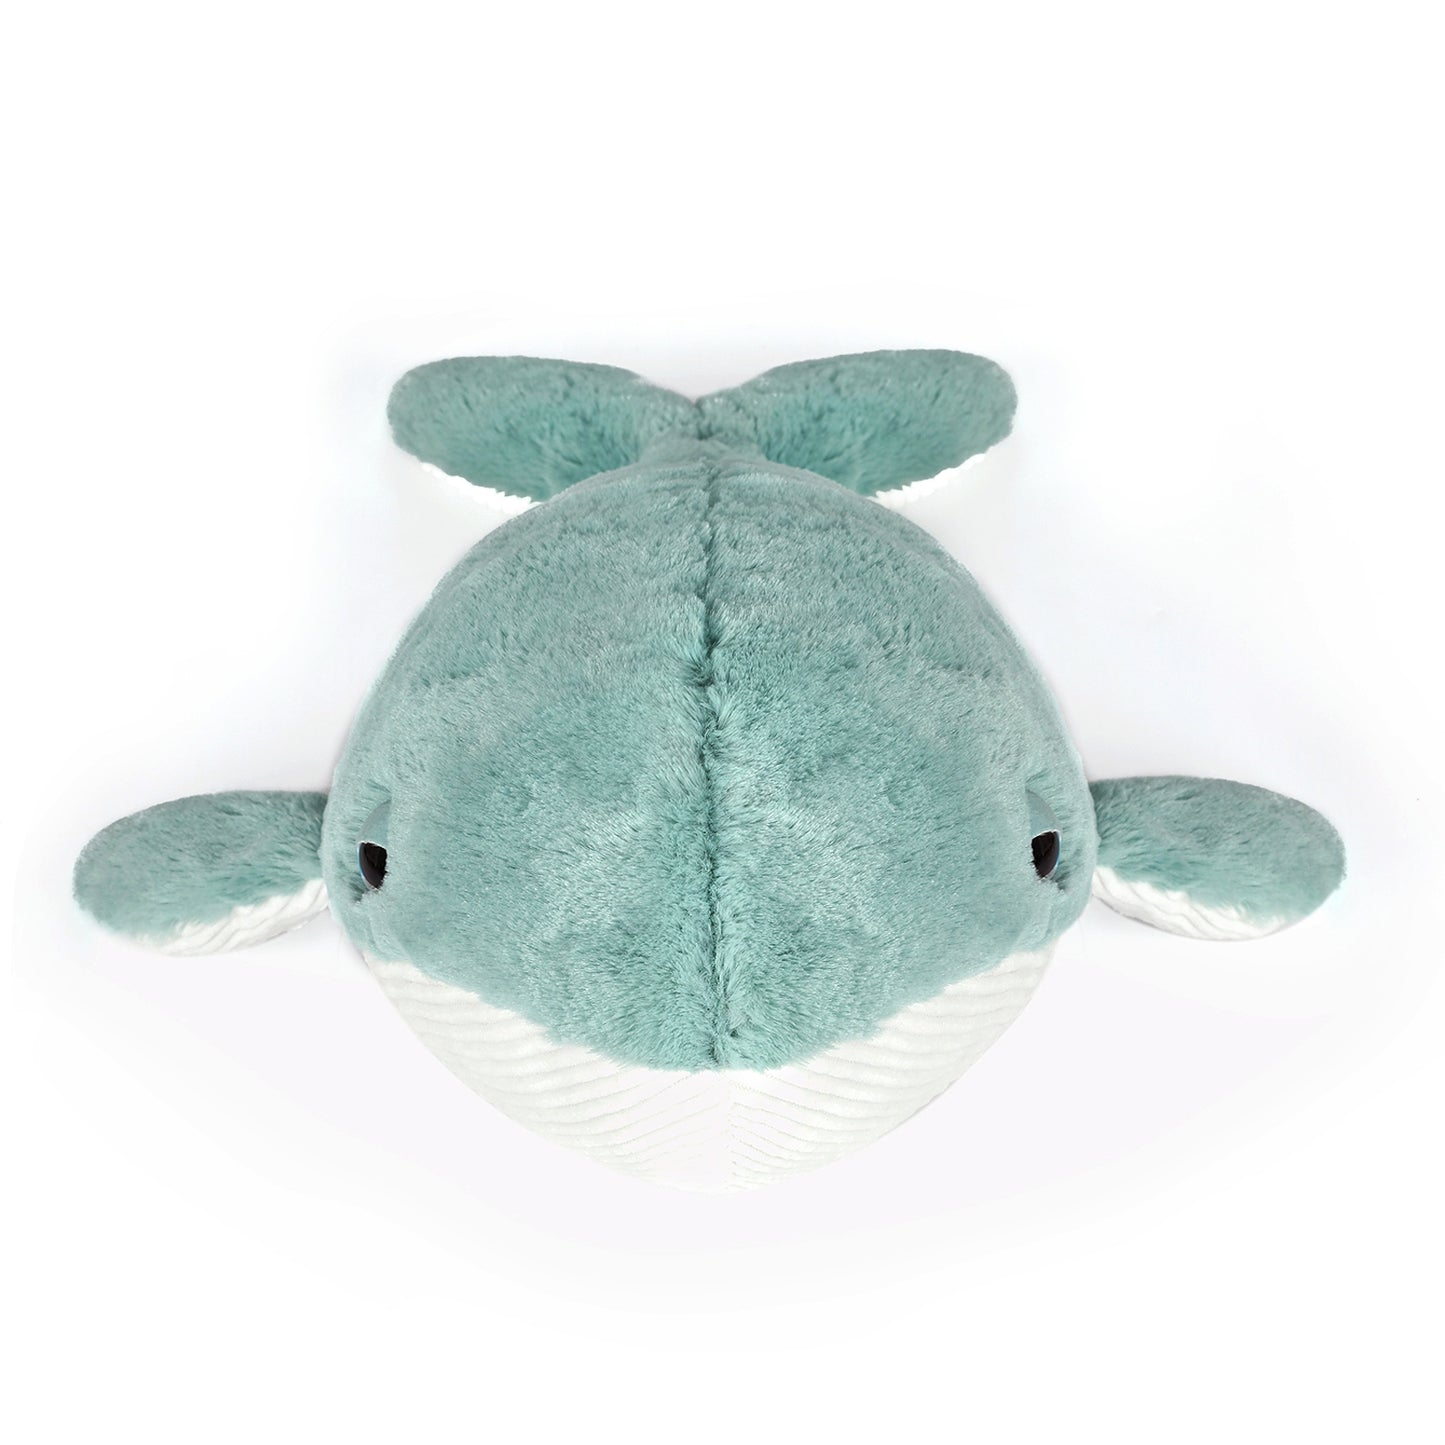 hurley blue whale stuffed animal toy, Designed by OB in Australia